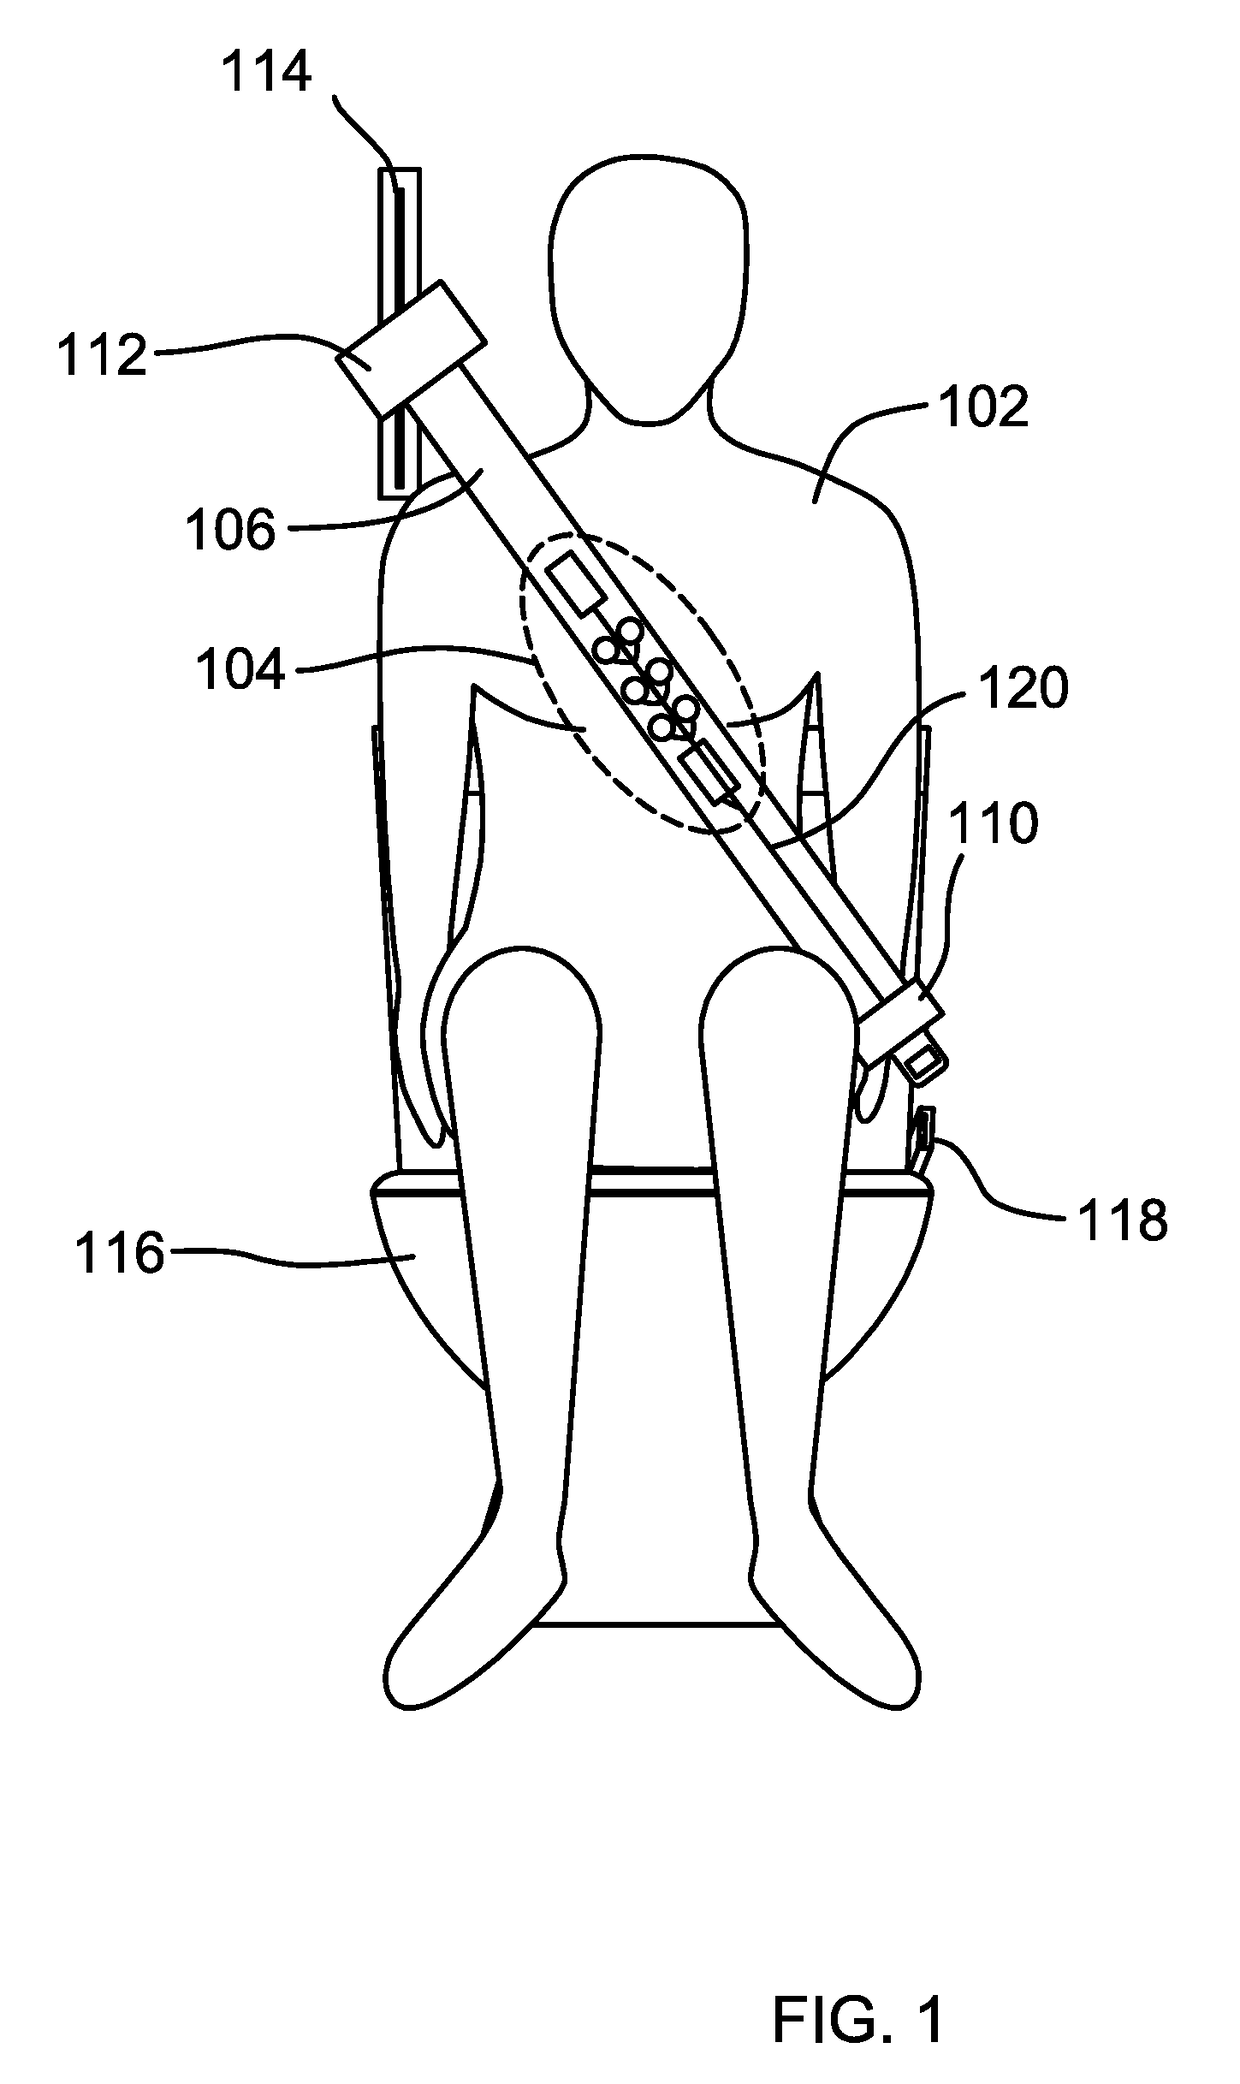 Method of Monitoring Health While Using a Toilet